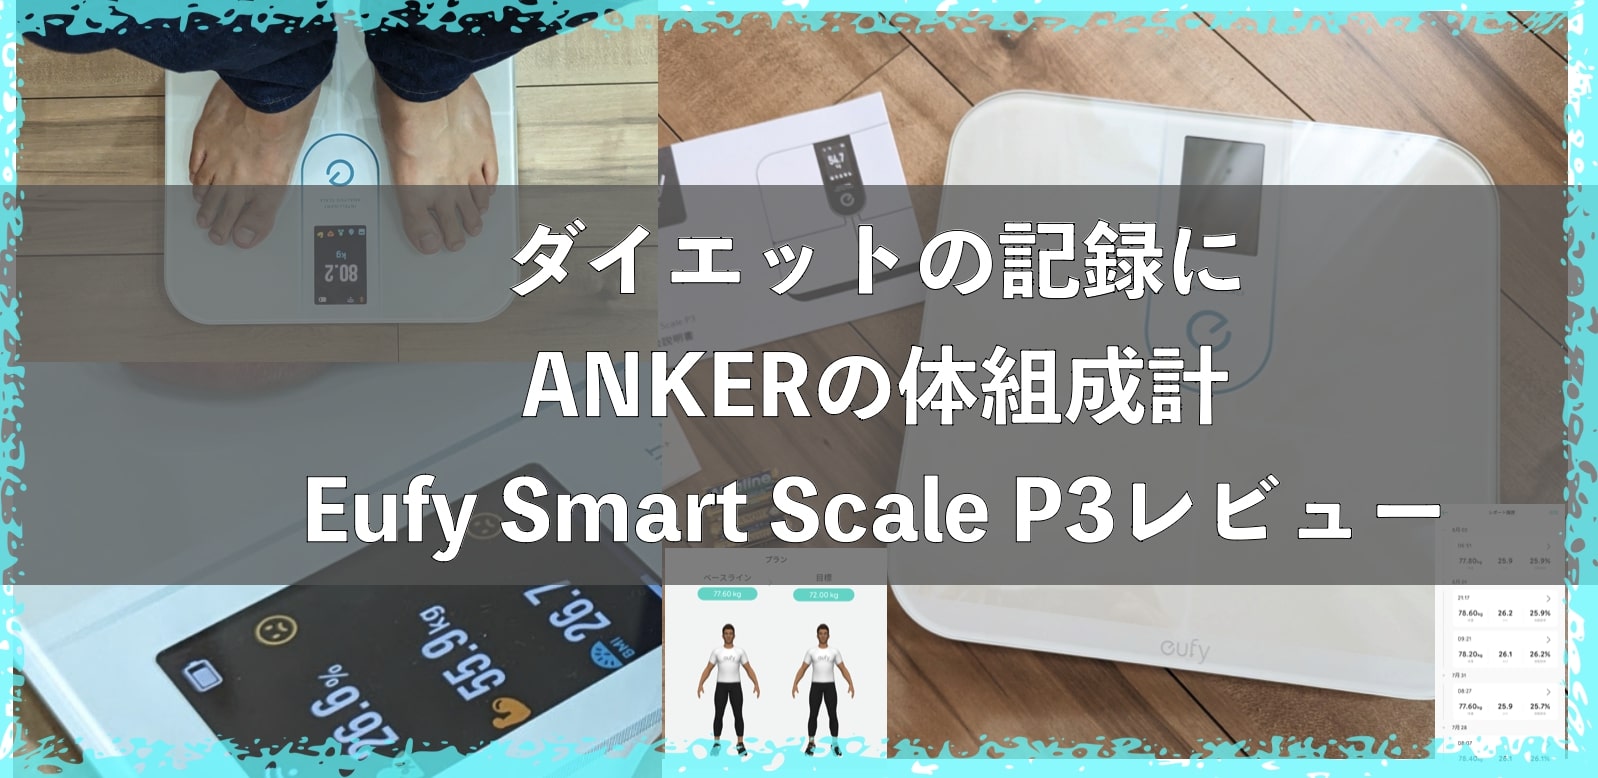 Anker 体組成計　レビュー　Smart Scale P3 口コミ　ダイエット　体脂肪